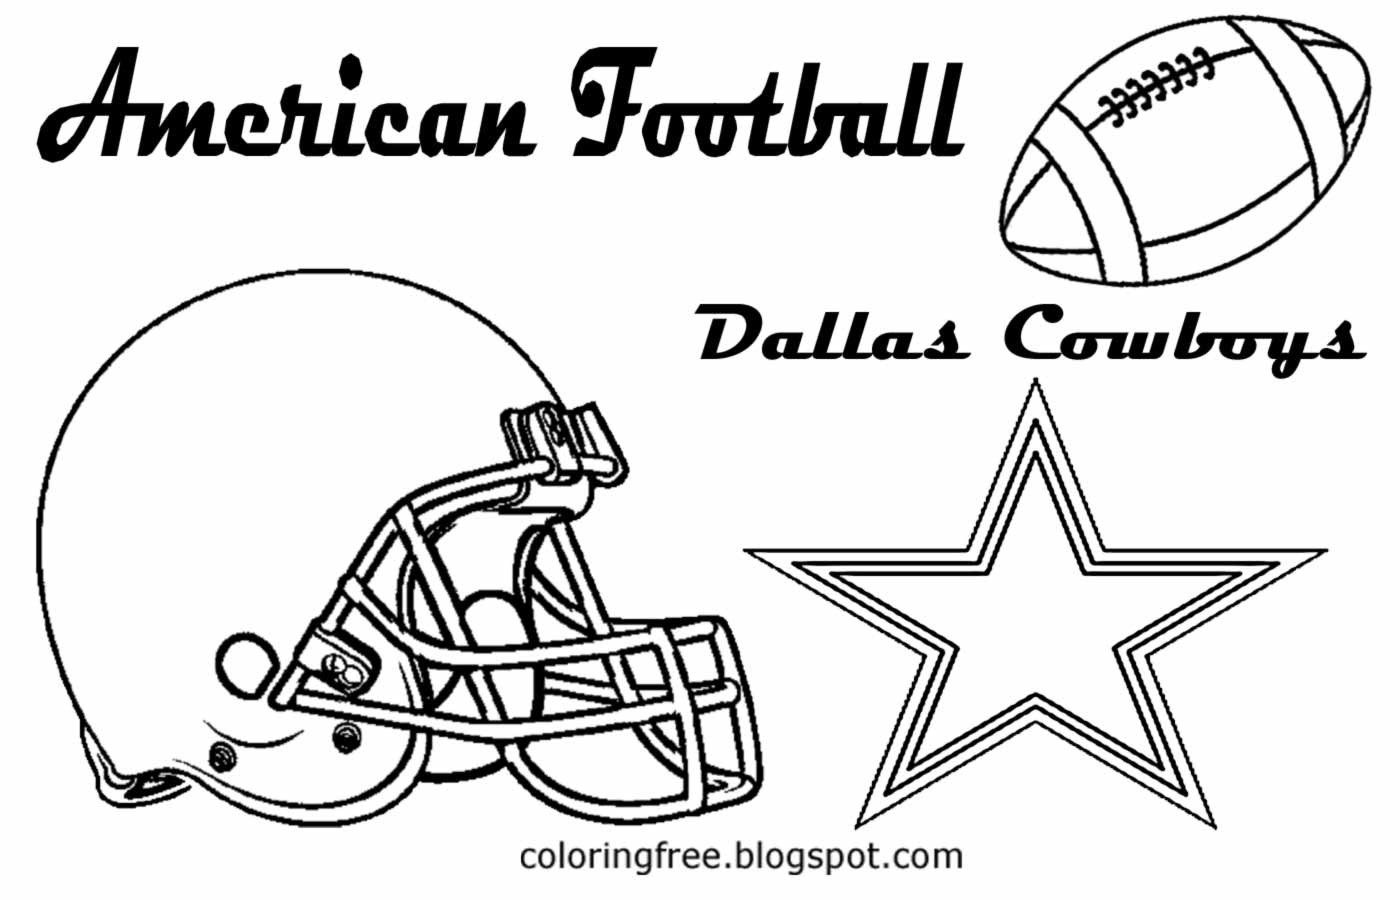 Dallas Cowboys Coloring Sheet
 Free Coloring Pages Printable To Color Kids